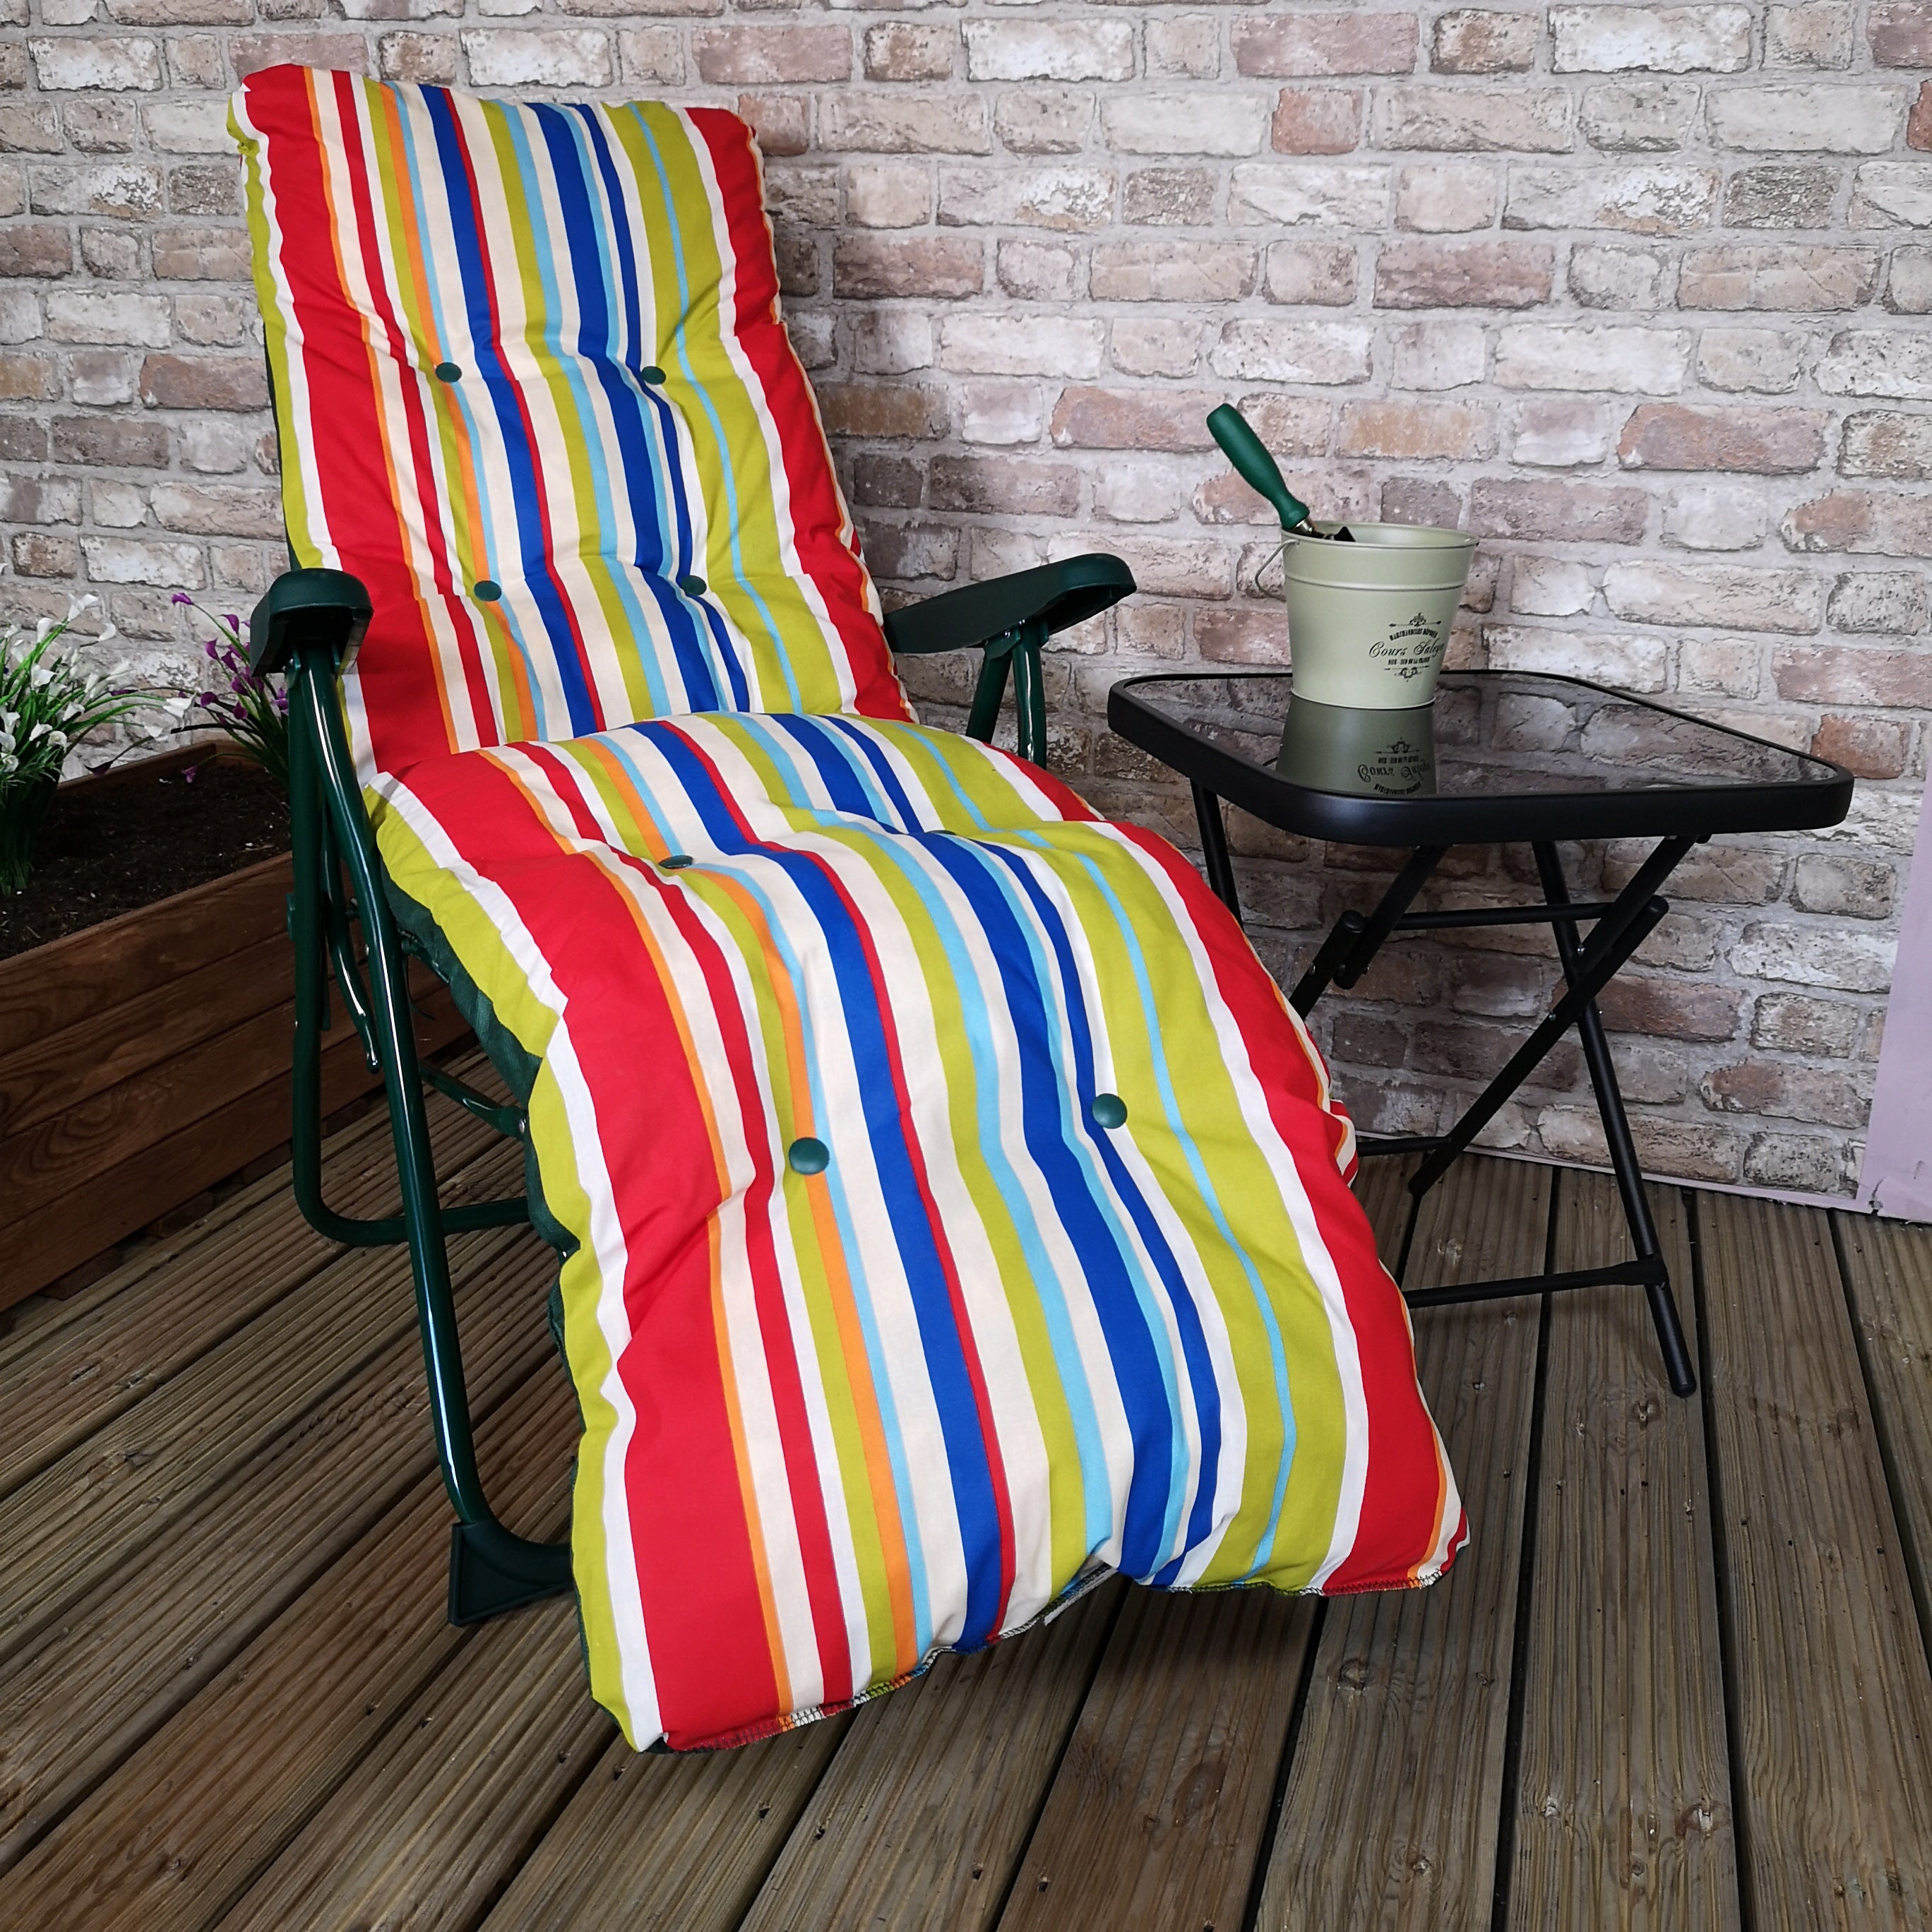 Padded Outdoor Garden Patio Recliner / Sun Lounger with Stripes